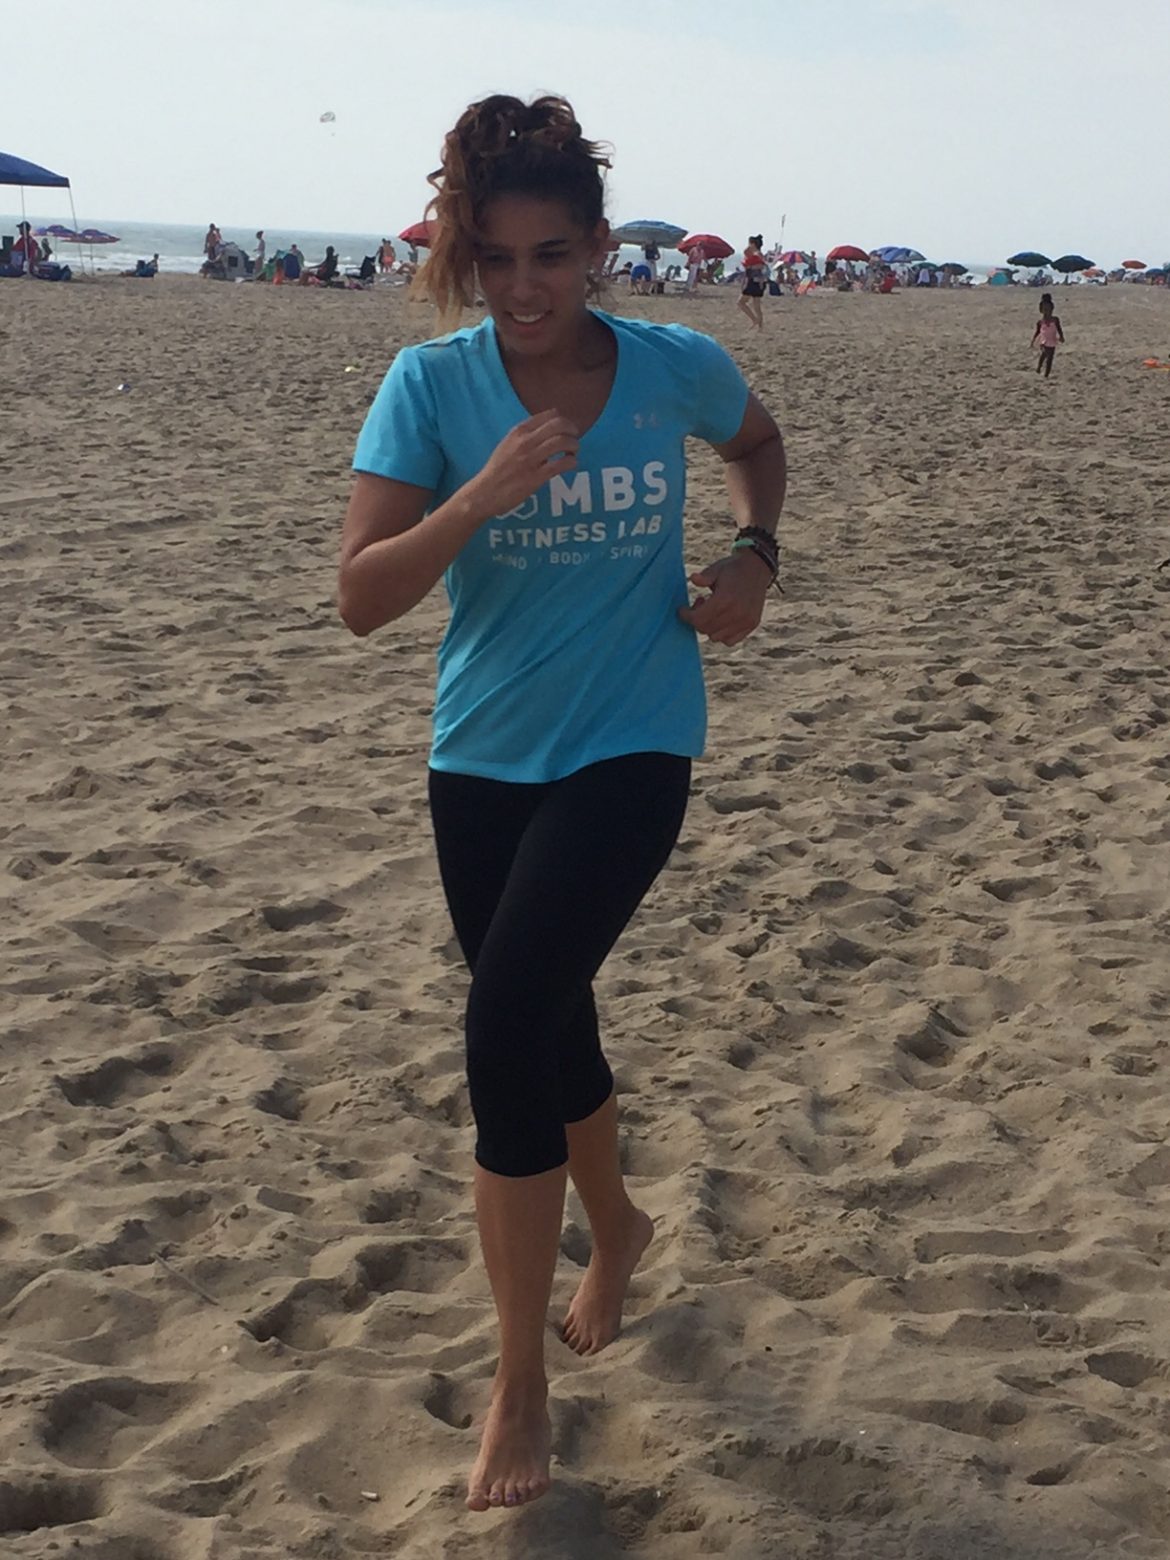 Jogging on beach with MBS Fitness